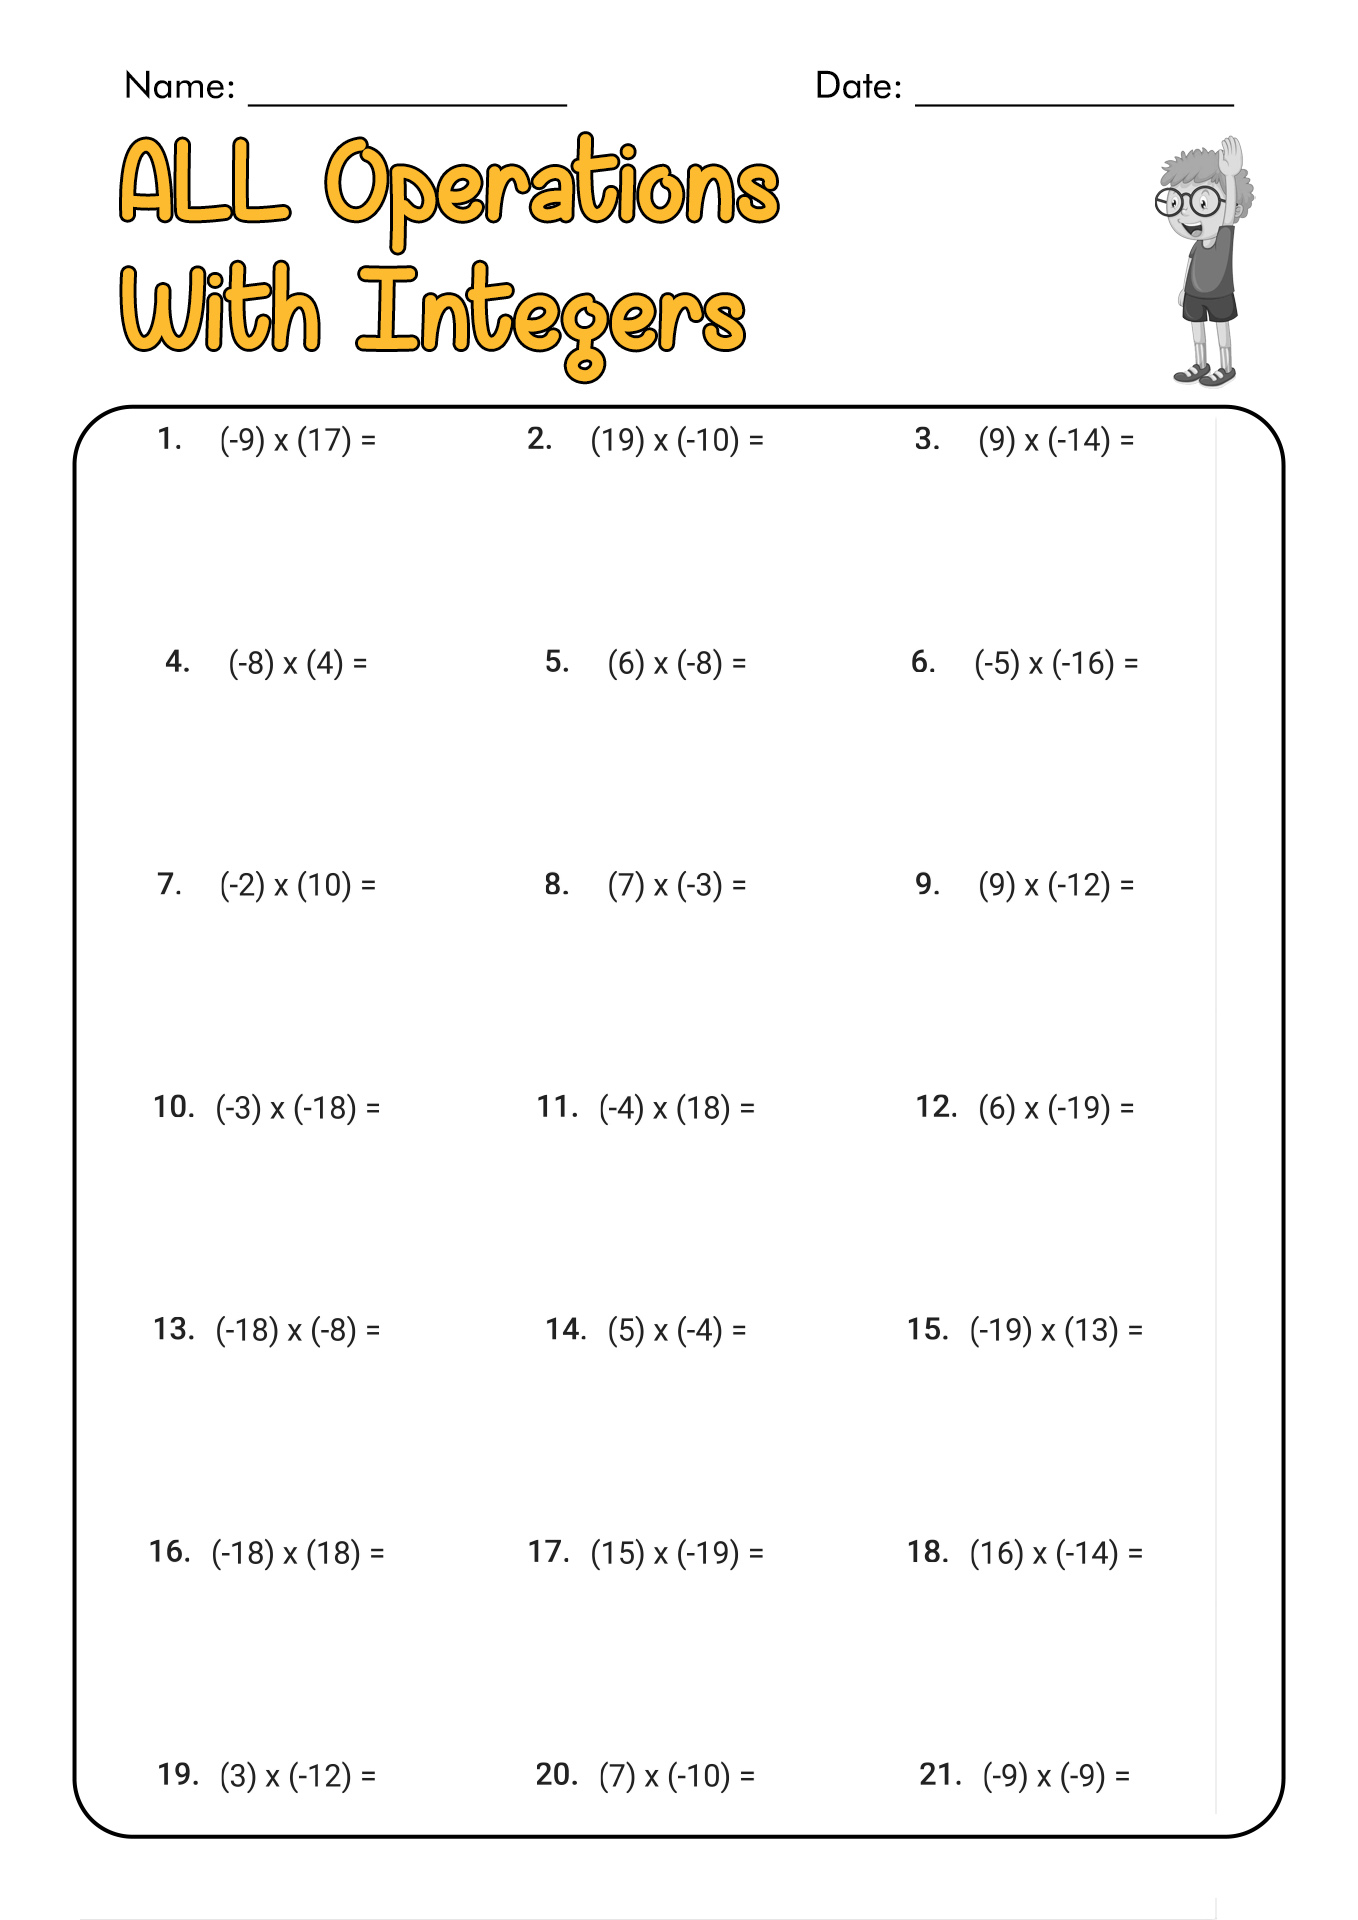 operations-with-integers-worksheet-all-operations-with-integers